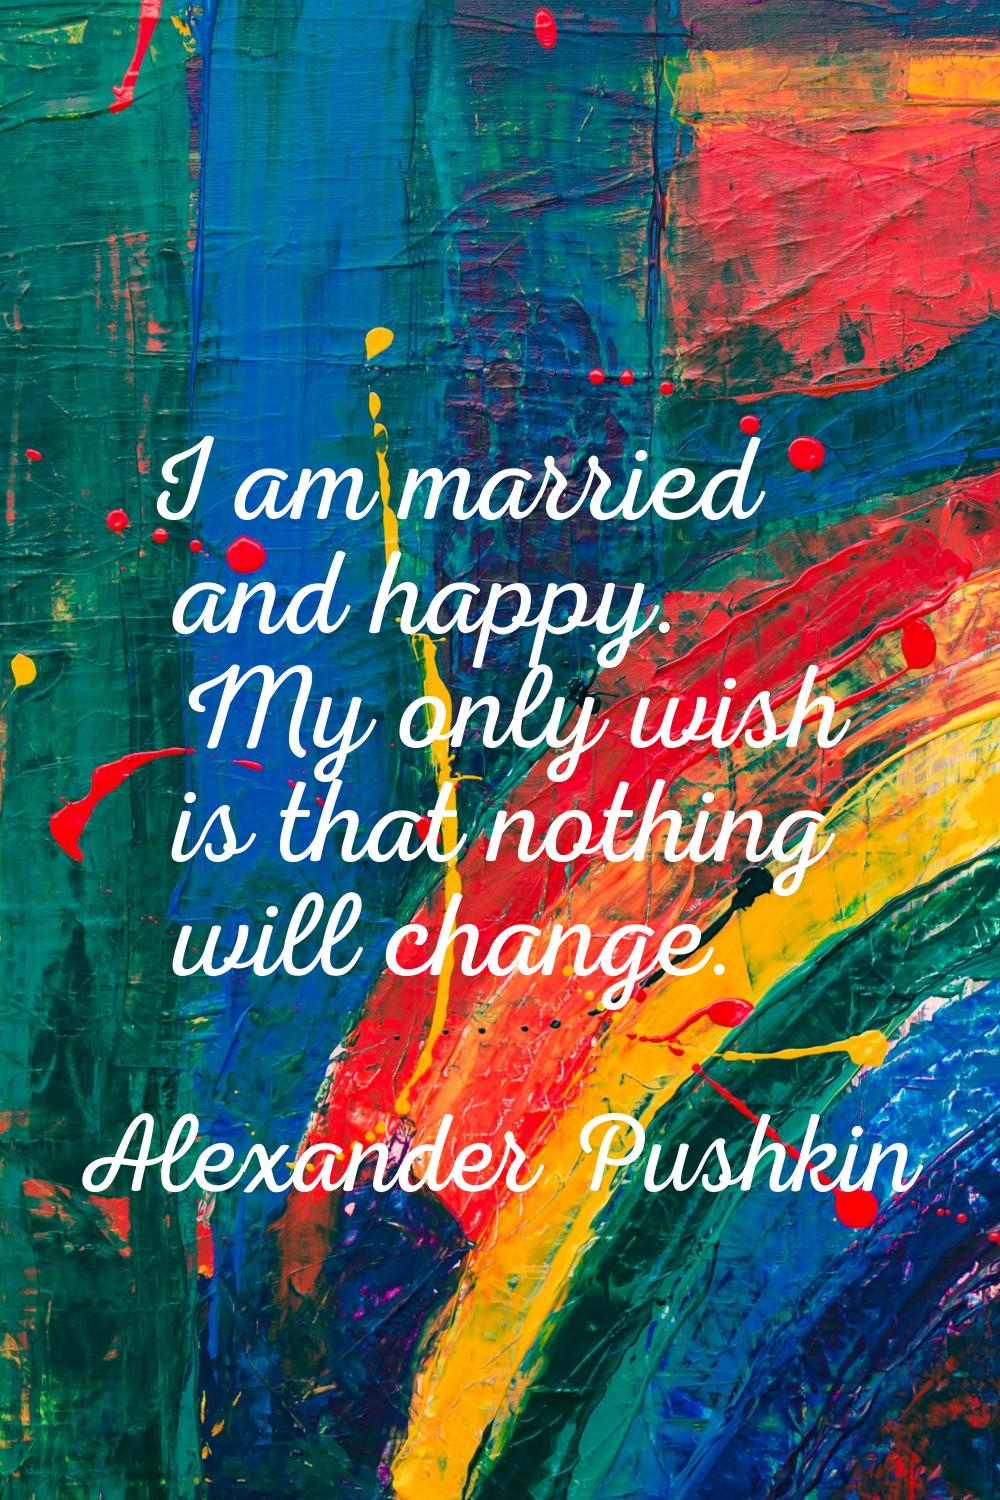 I am married and happy. My only wish is that nothing will change.